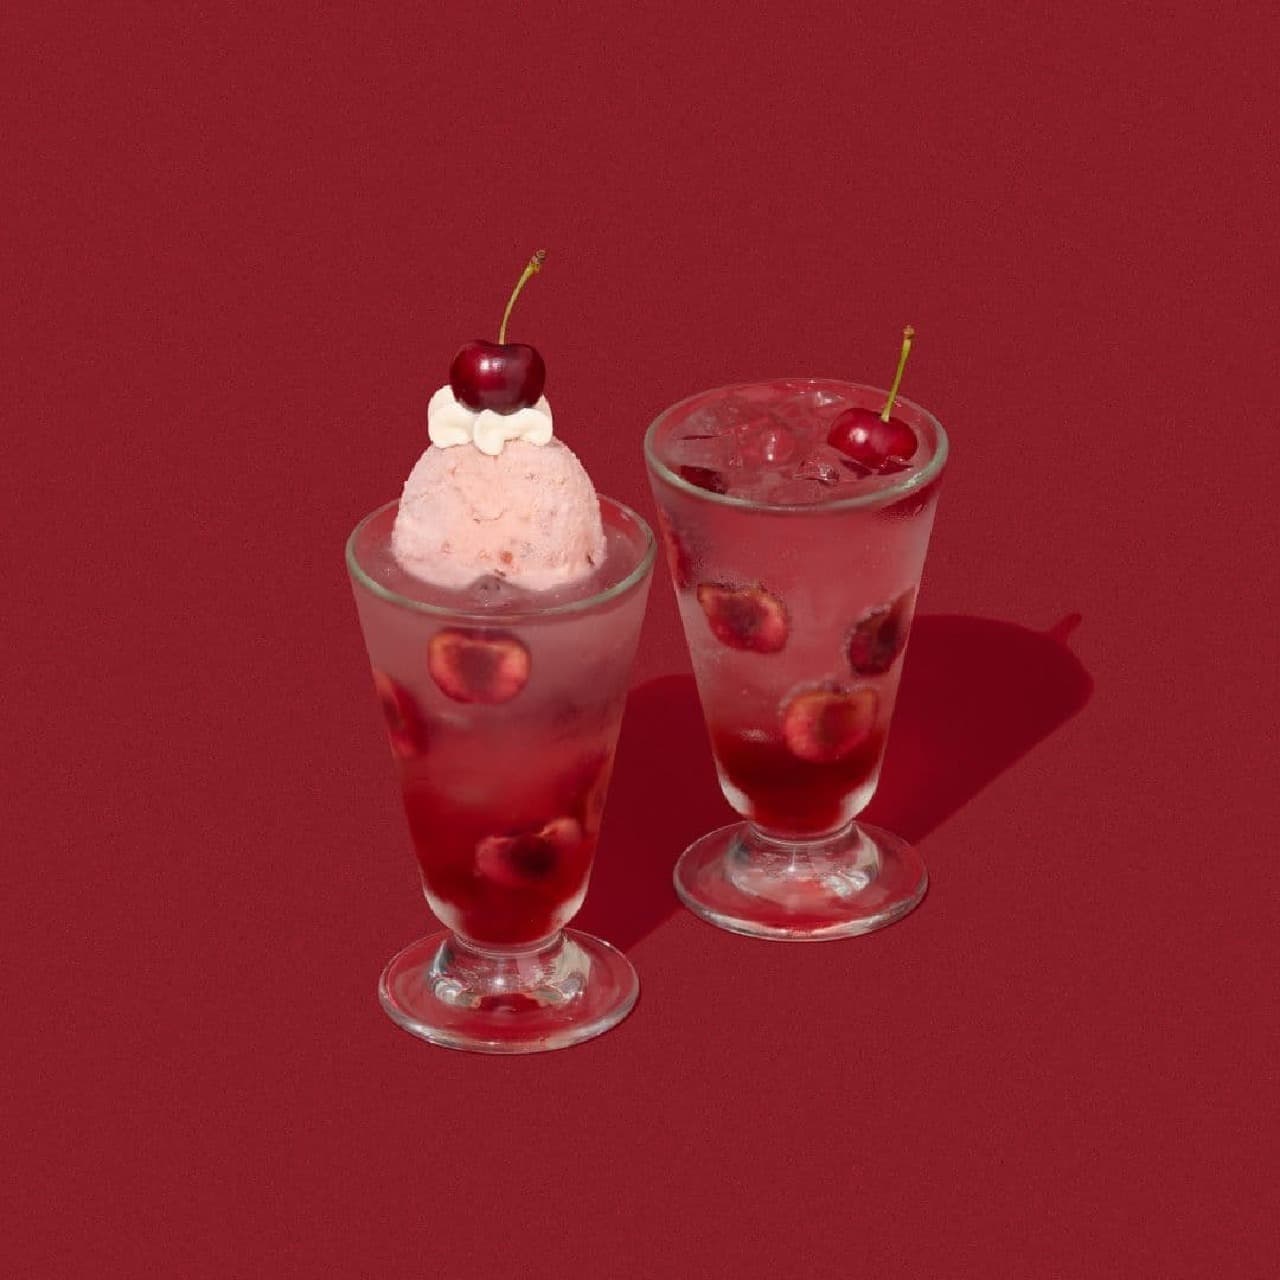 Gelato Pique Cafe "American Cherry Soda" and "American Cherry Float